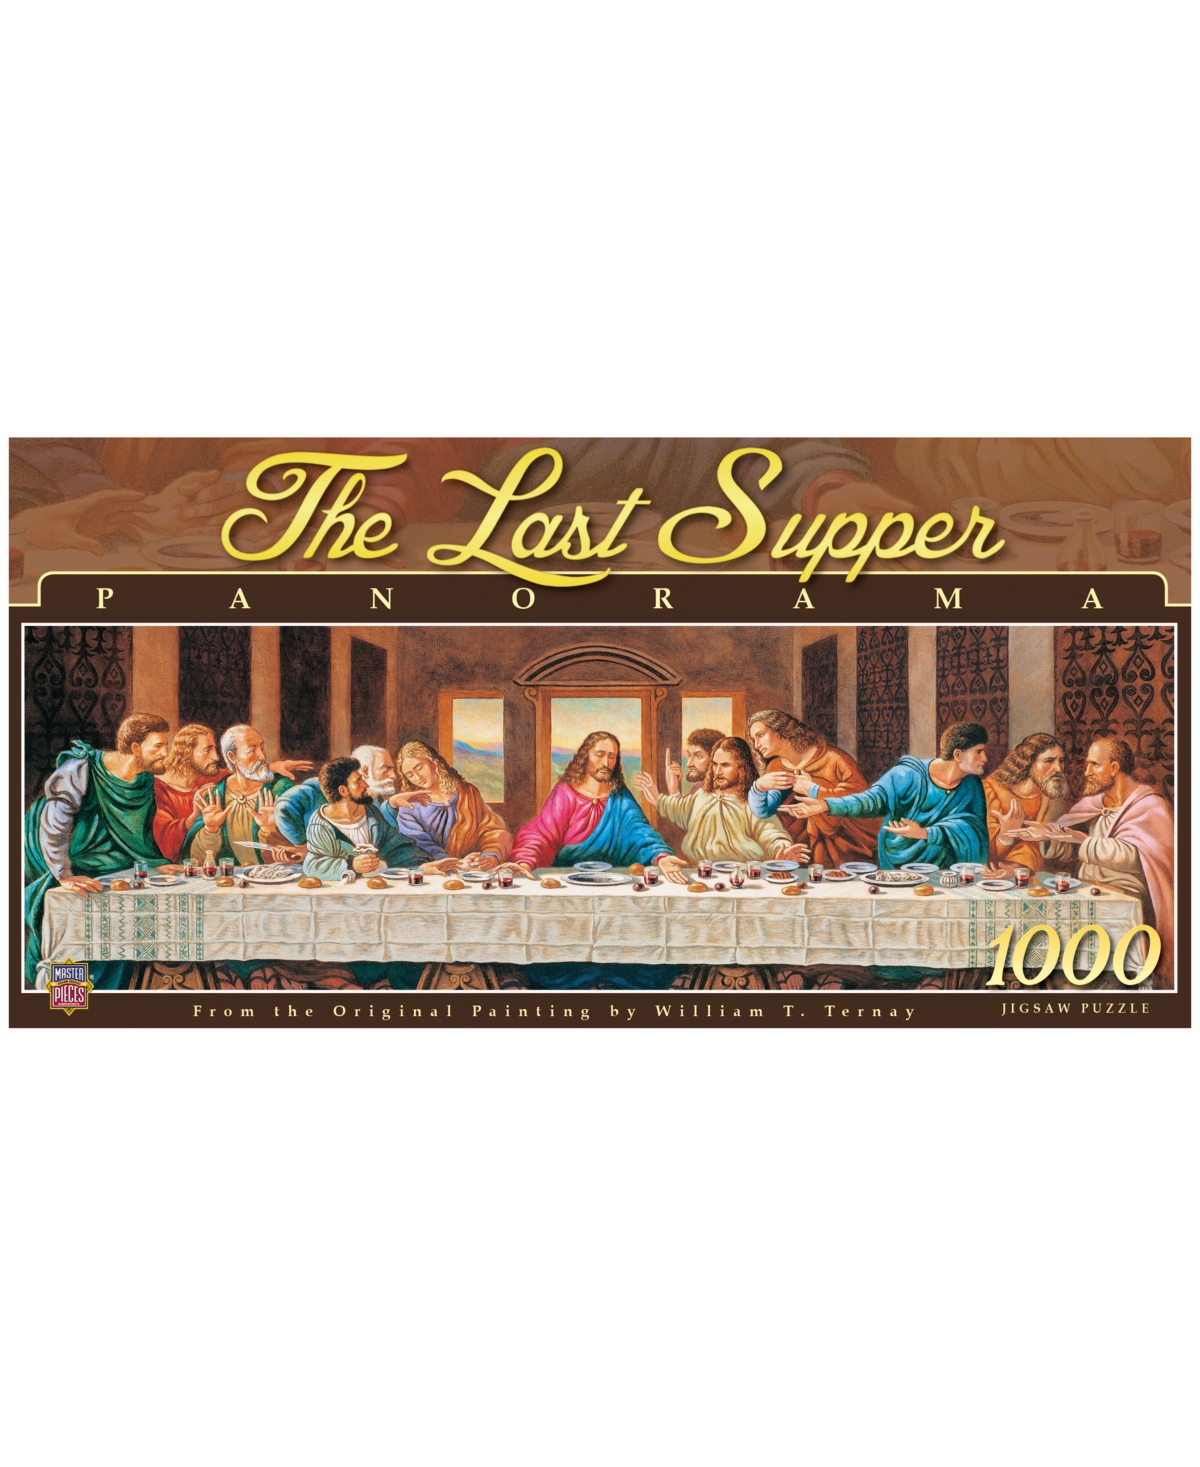 Masterpieces Puzzles The Last Supper Panorama Puzzle Set, 1000 Piece In Multi